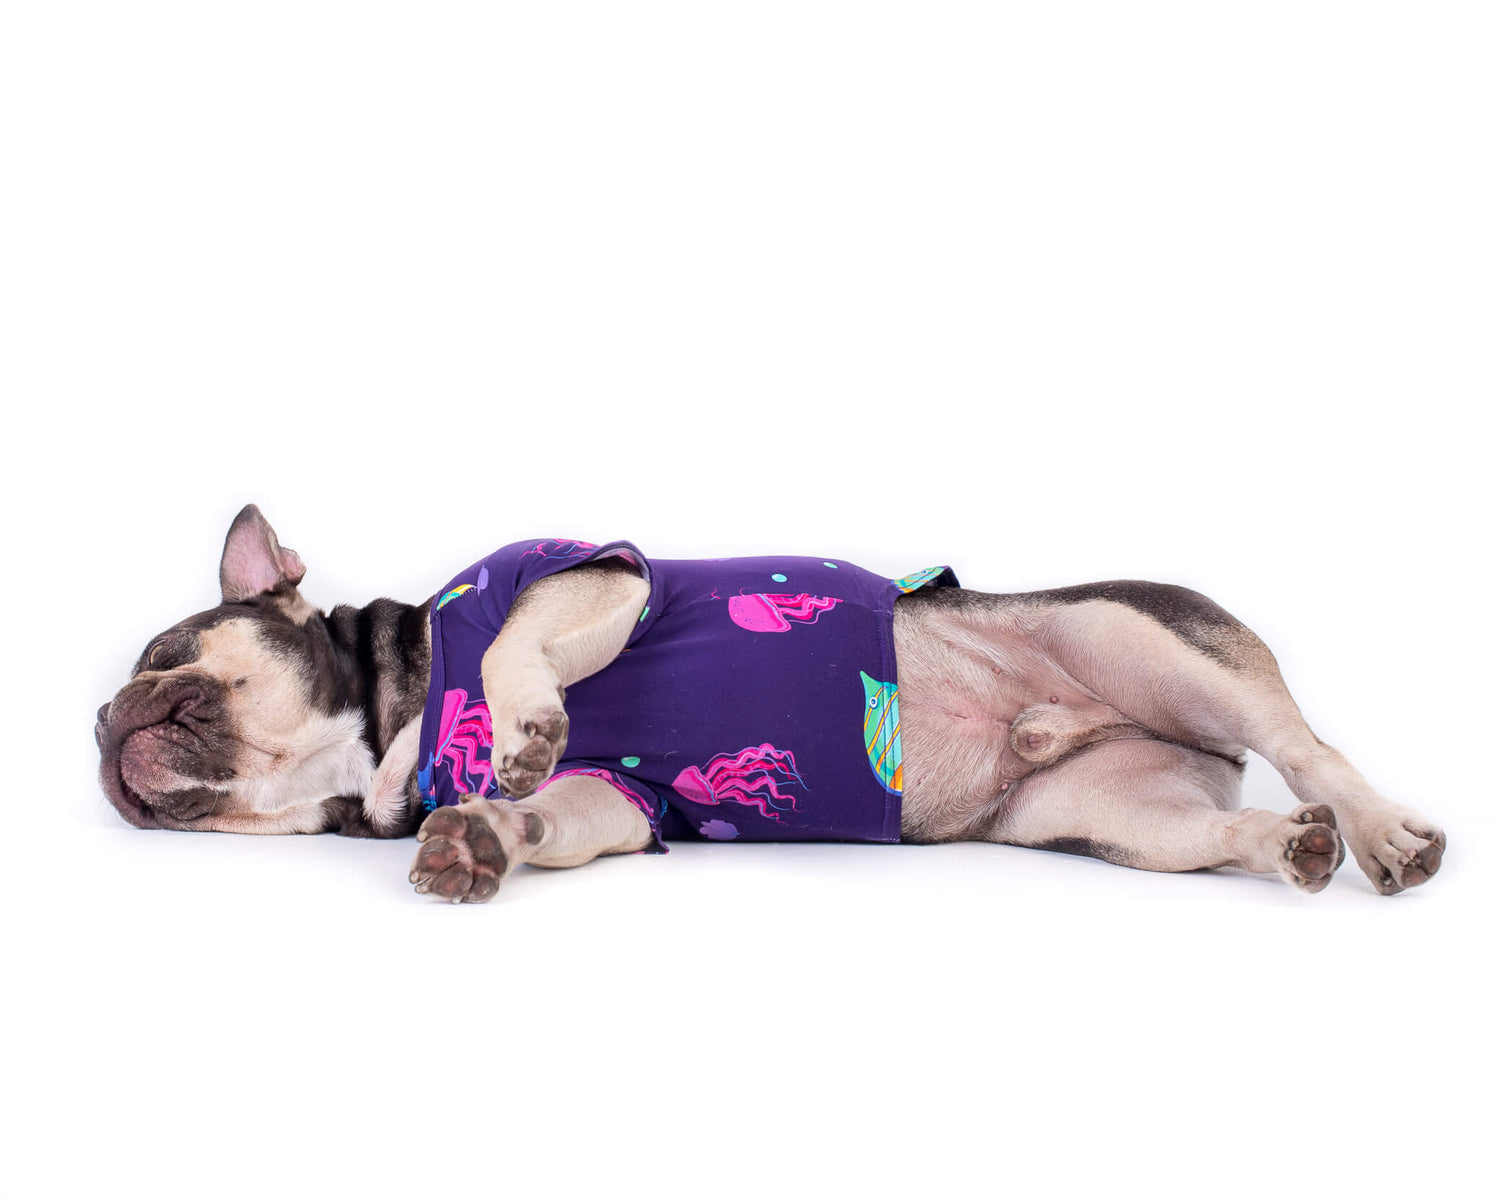  A chocolate and tan French Bulldog wearing the "Magic Sea" shirt by Vibrant Hound. The shirt is purple with vibrant tropical fish printed on it. The dog is lying down, showcasing the colorful design.